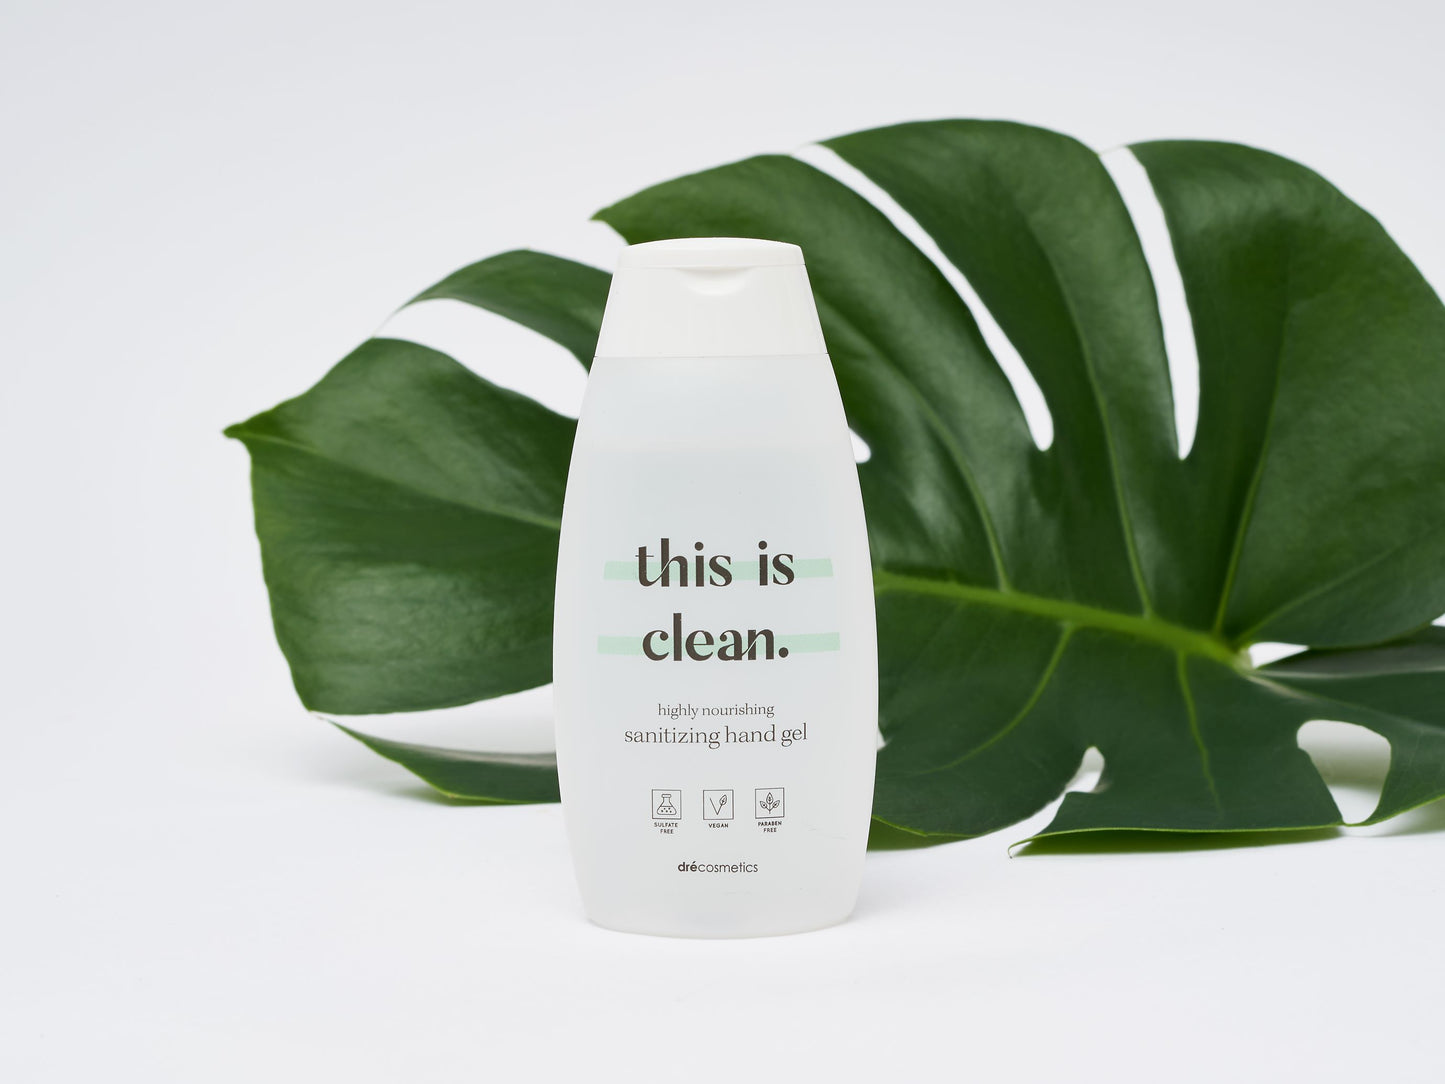 This is clean handcleanser